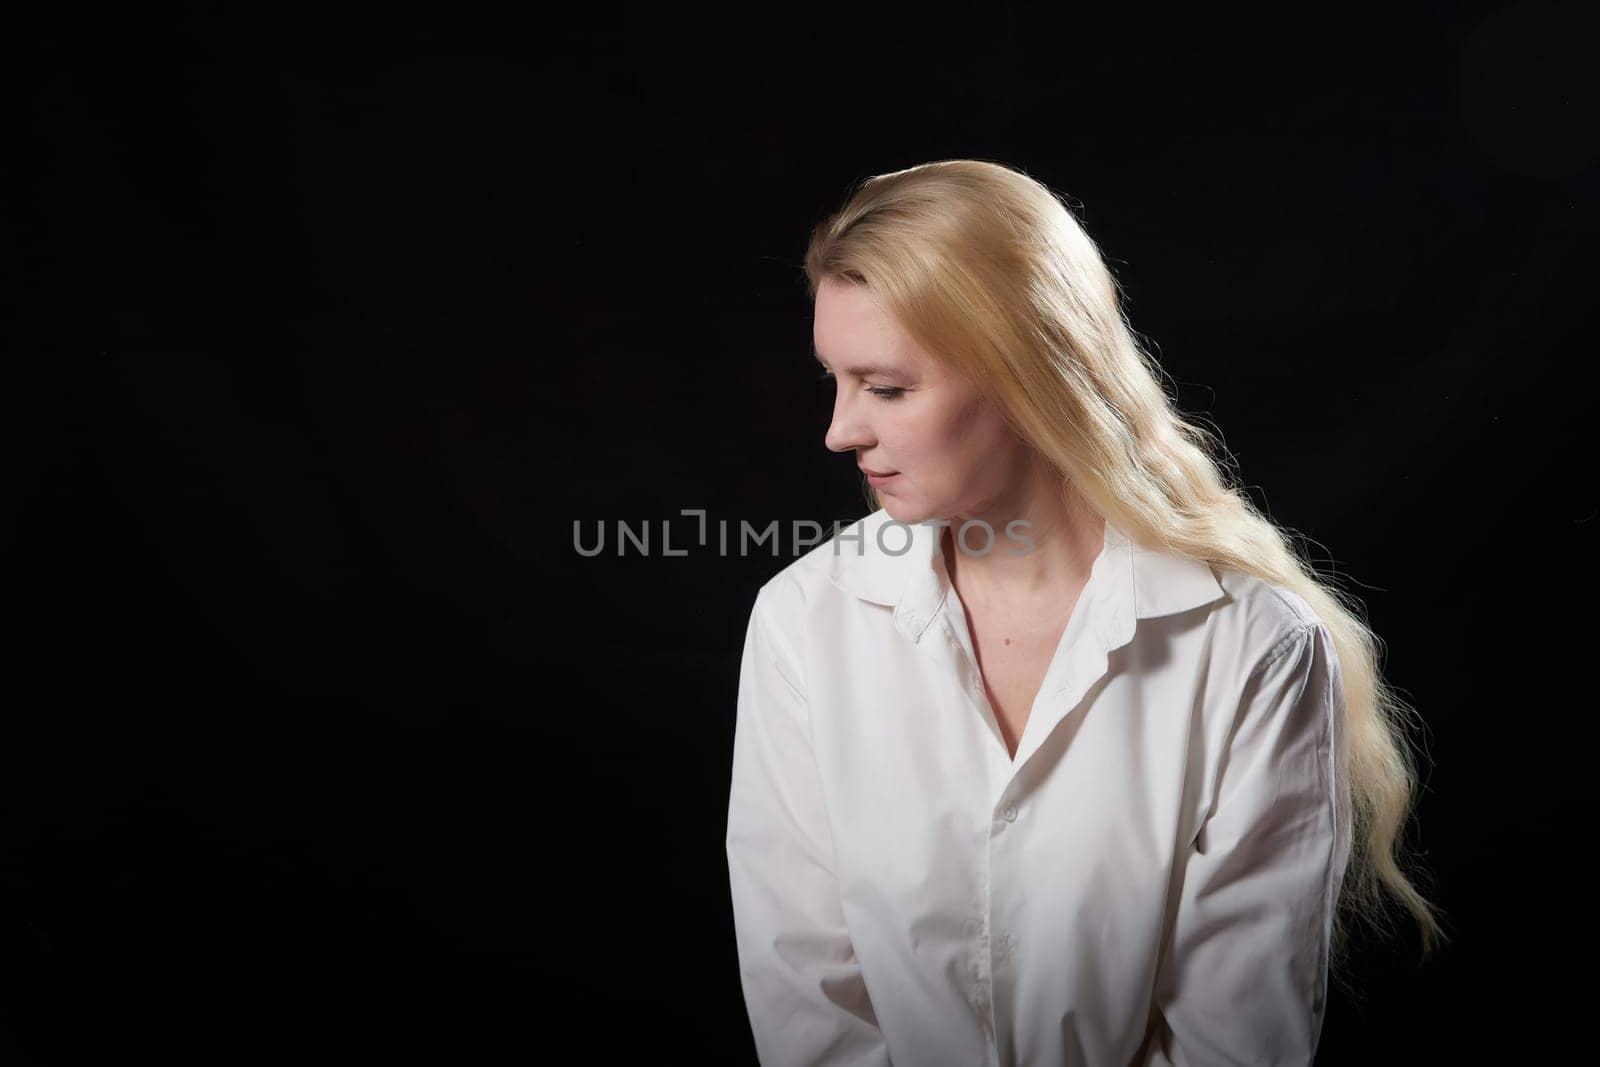 Young beautiful blonde girl in white shirt posing on a black background. Adult woman model posing alone in dark studio